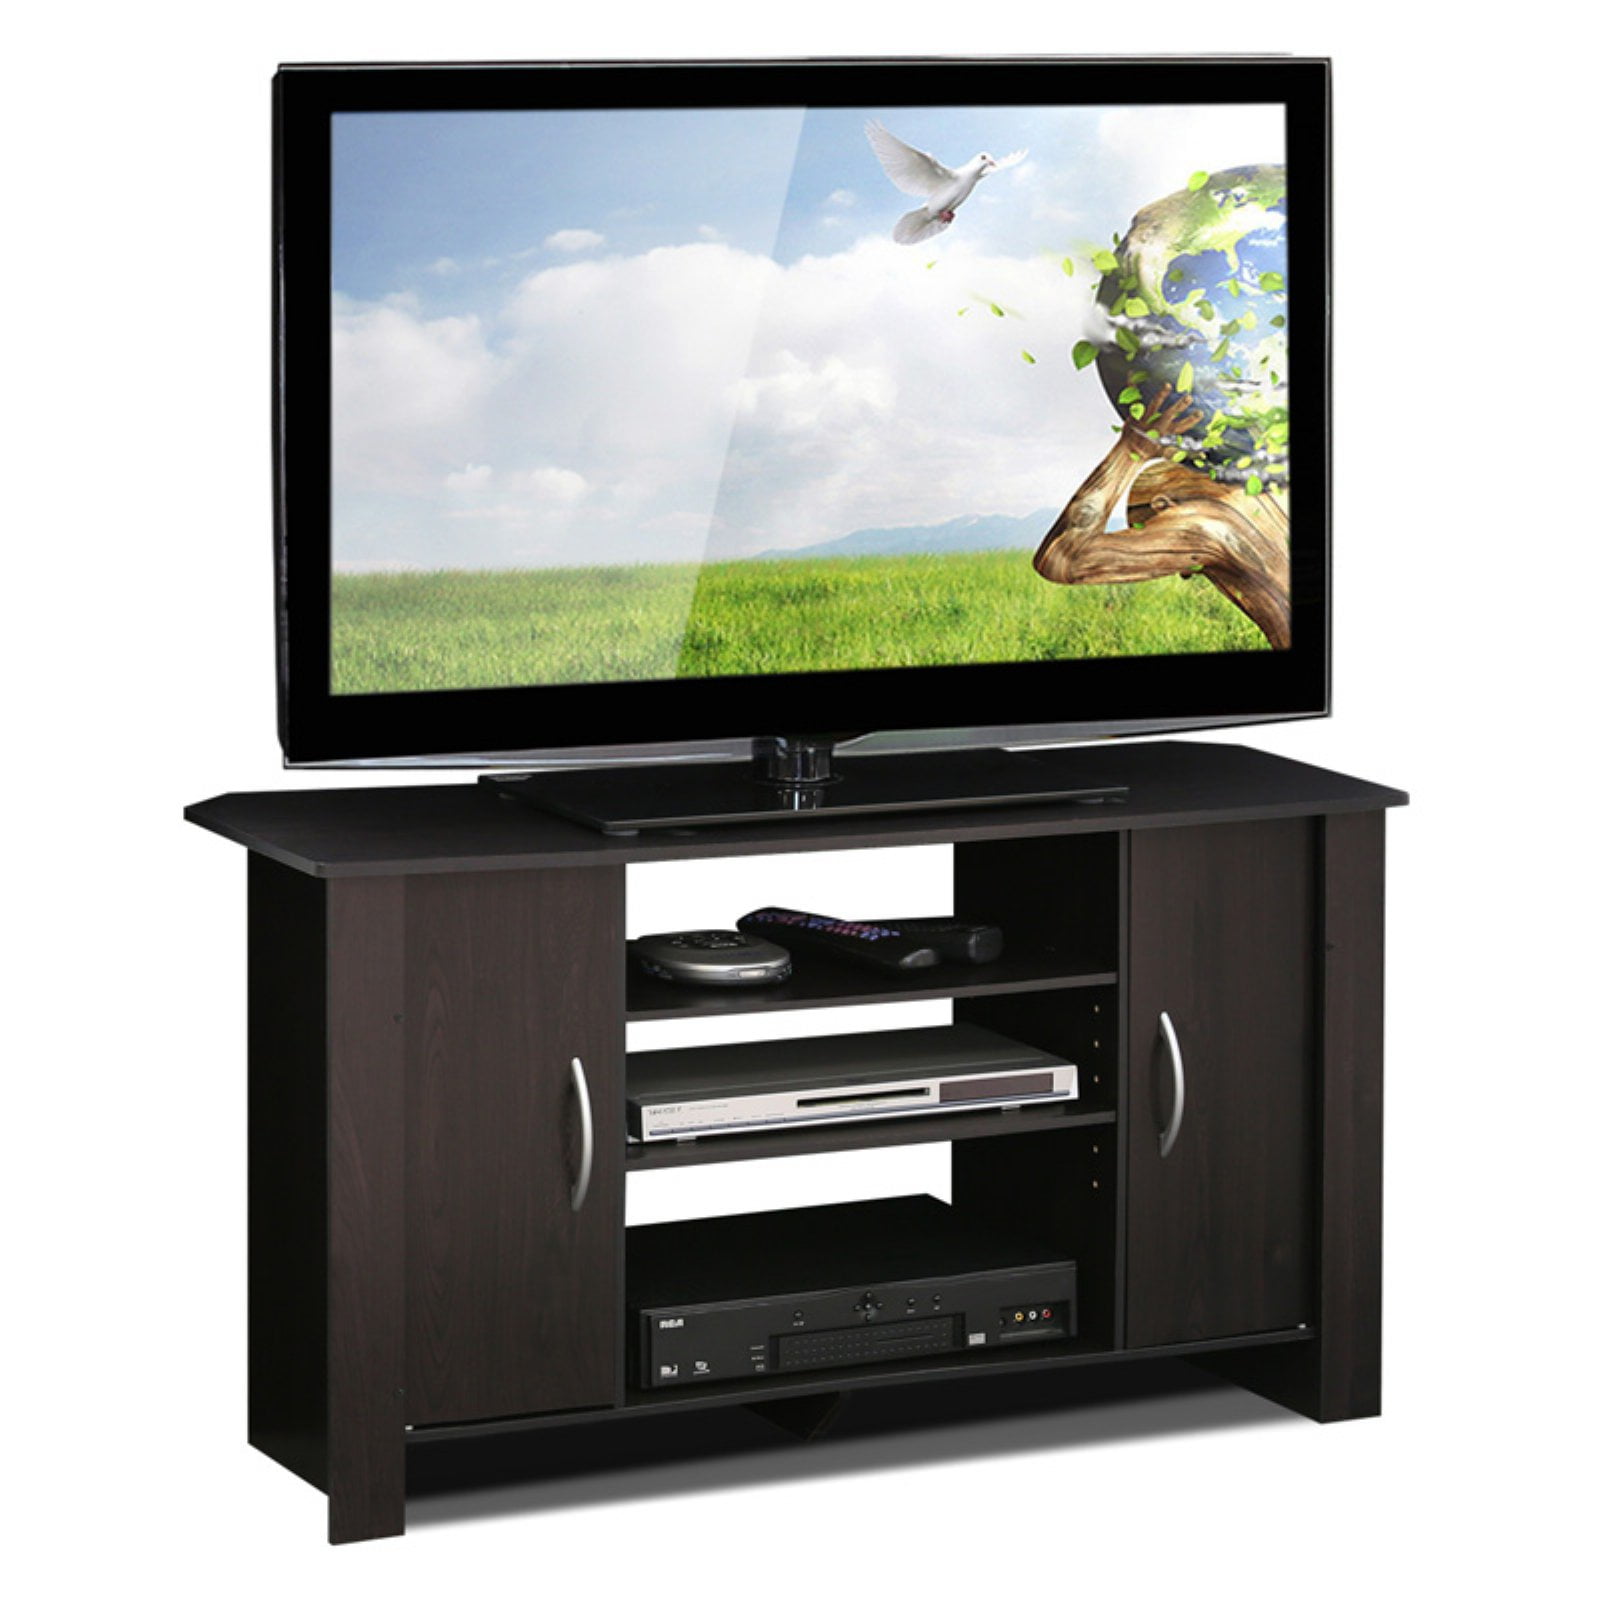 Details about   Mainstays TV Stand for TVs up to 42" Multiple Colors 